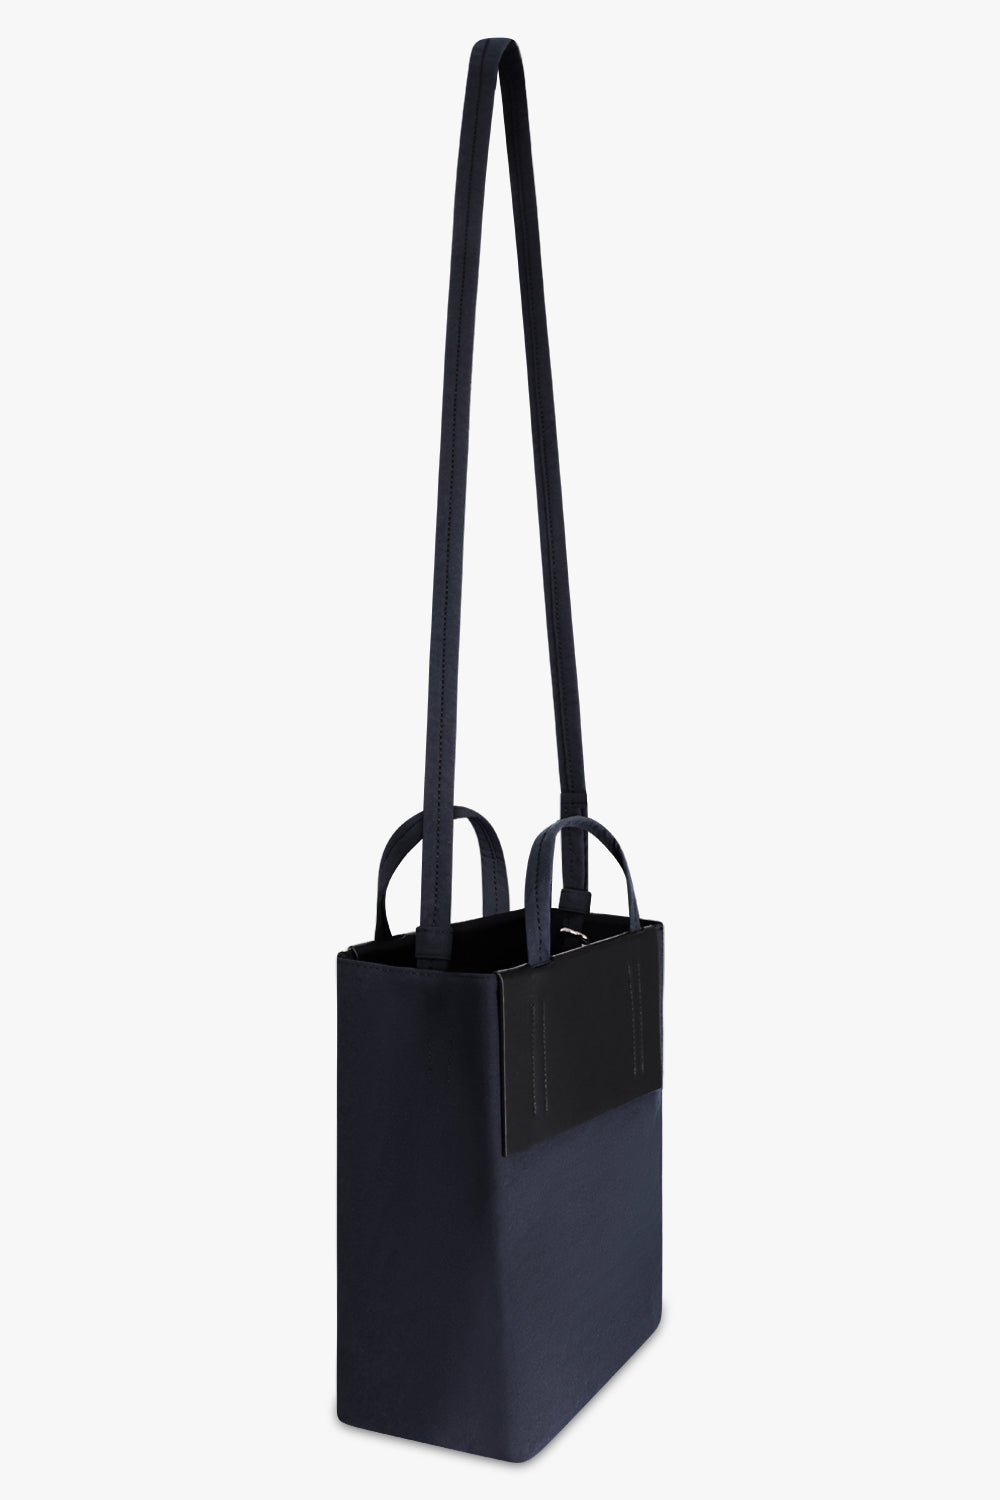 ACNE STUDIOS BAGS Black Baker Out Small Tote | Black